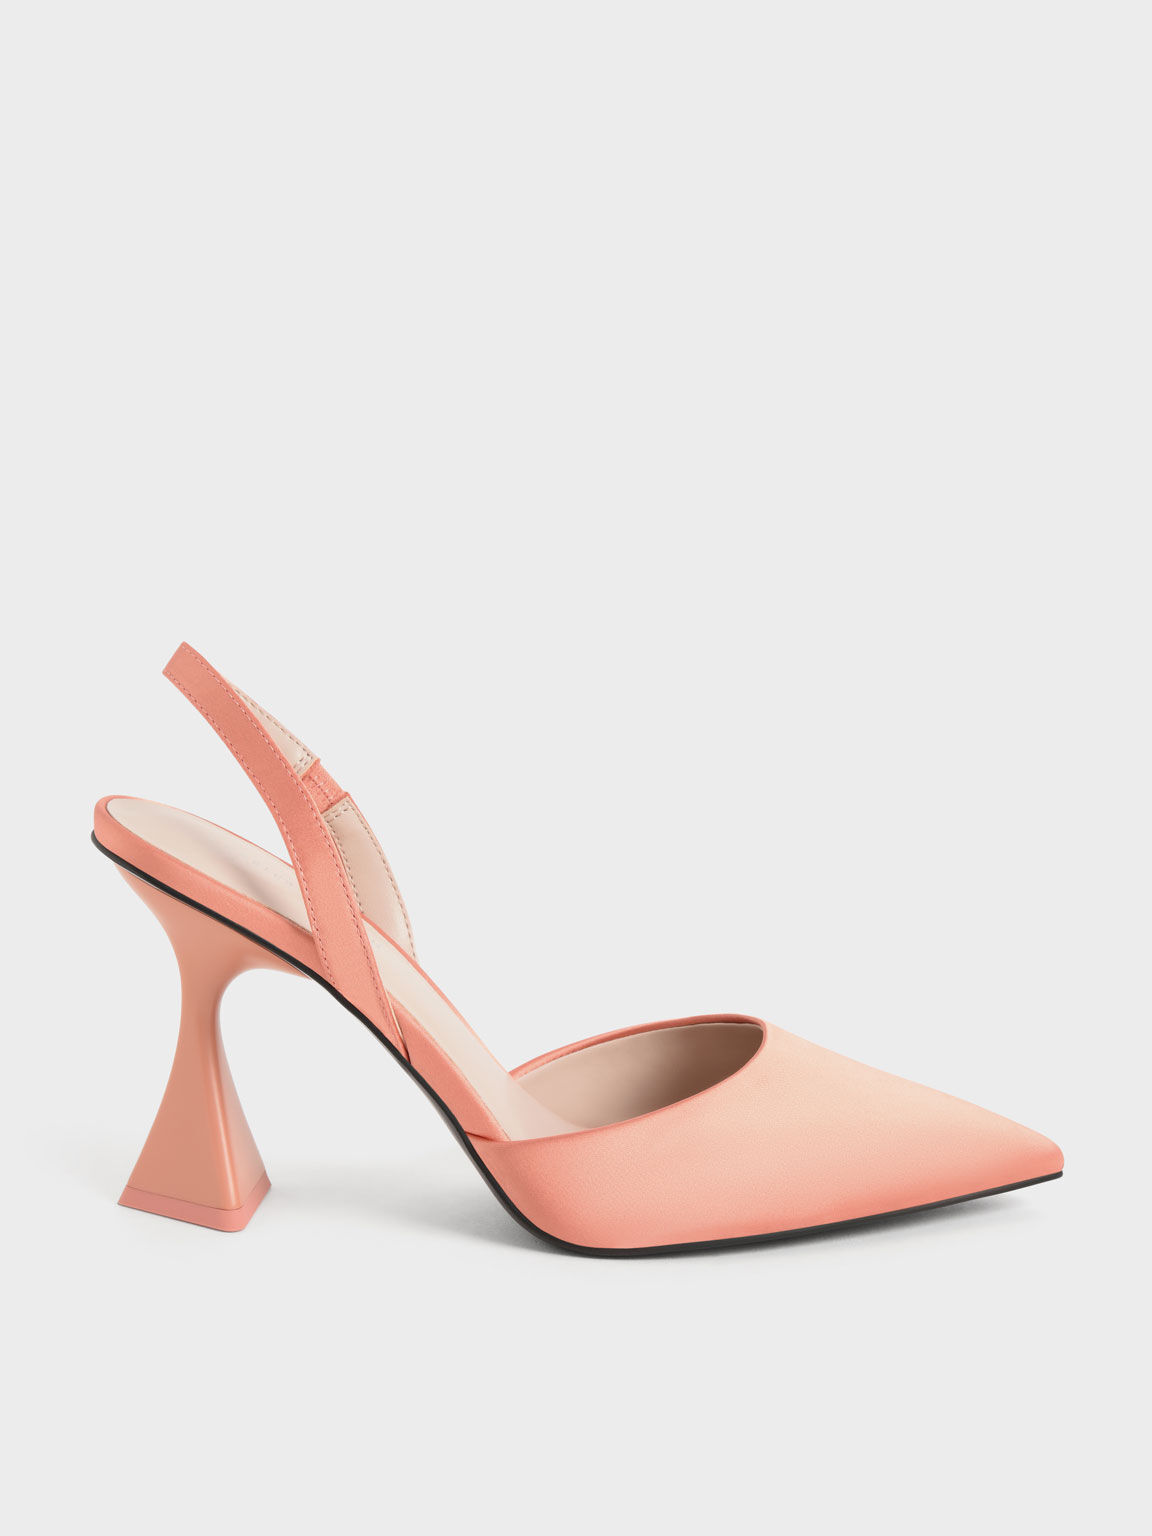 Recycled Polyester Slingback Pumps - Peach